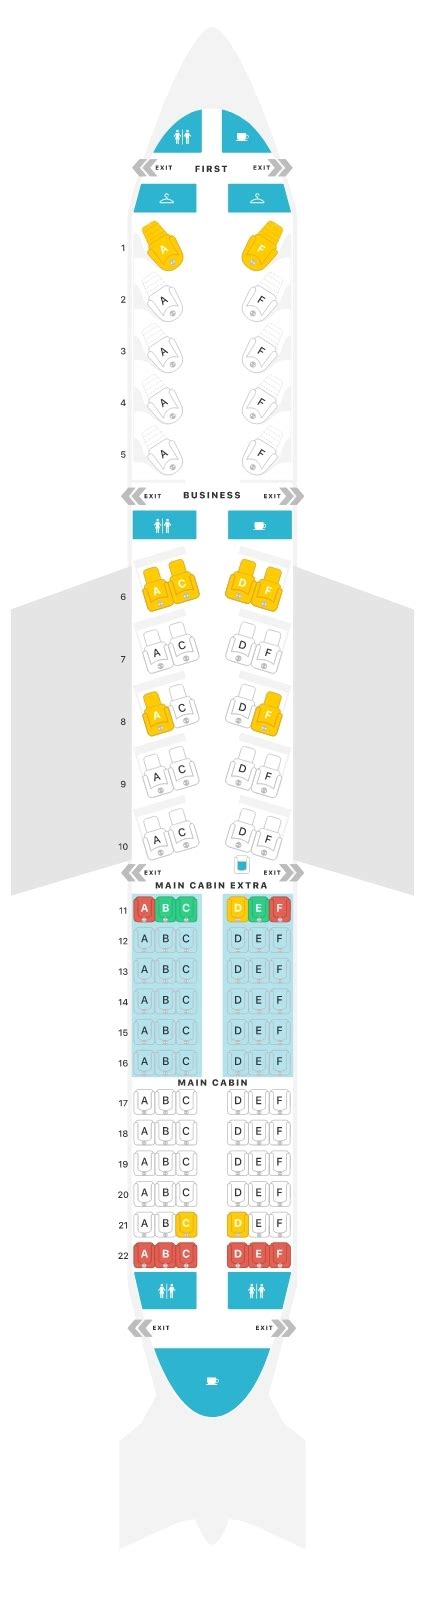 American Airlines A321 Seat Map Overview Airportix